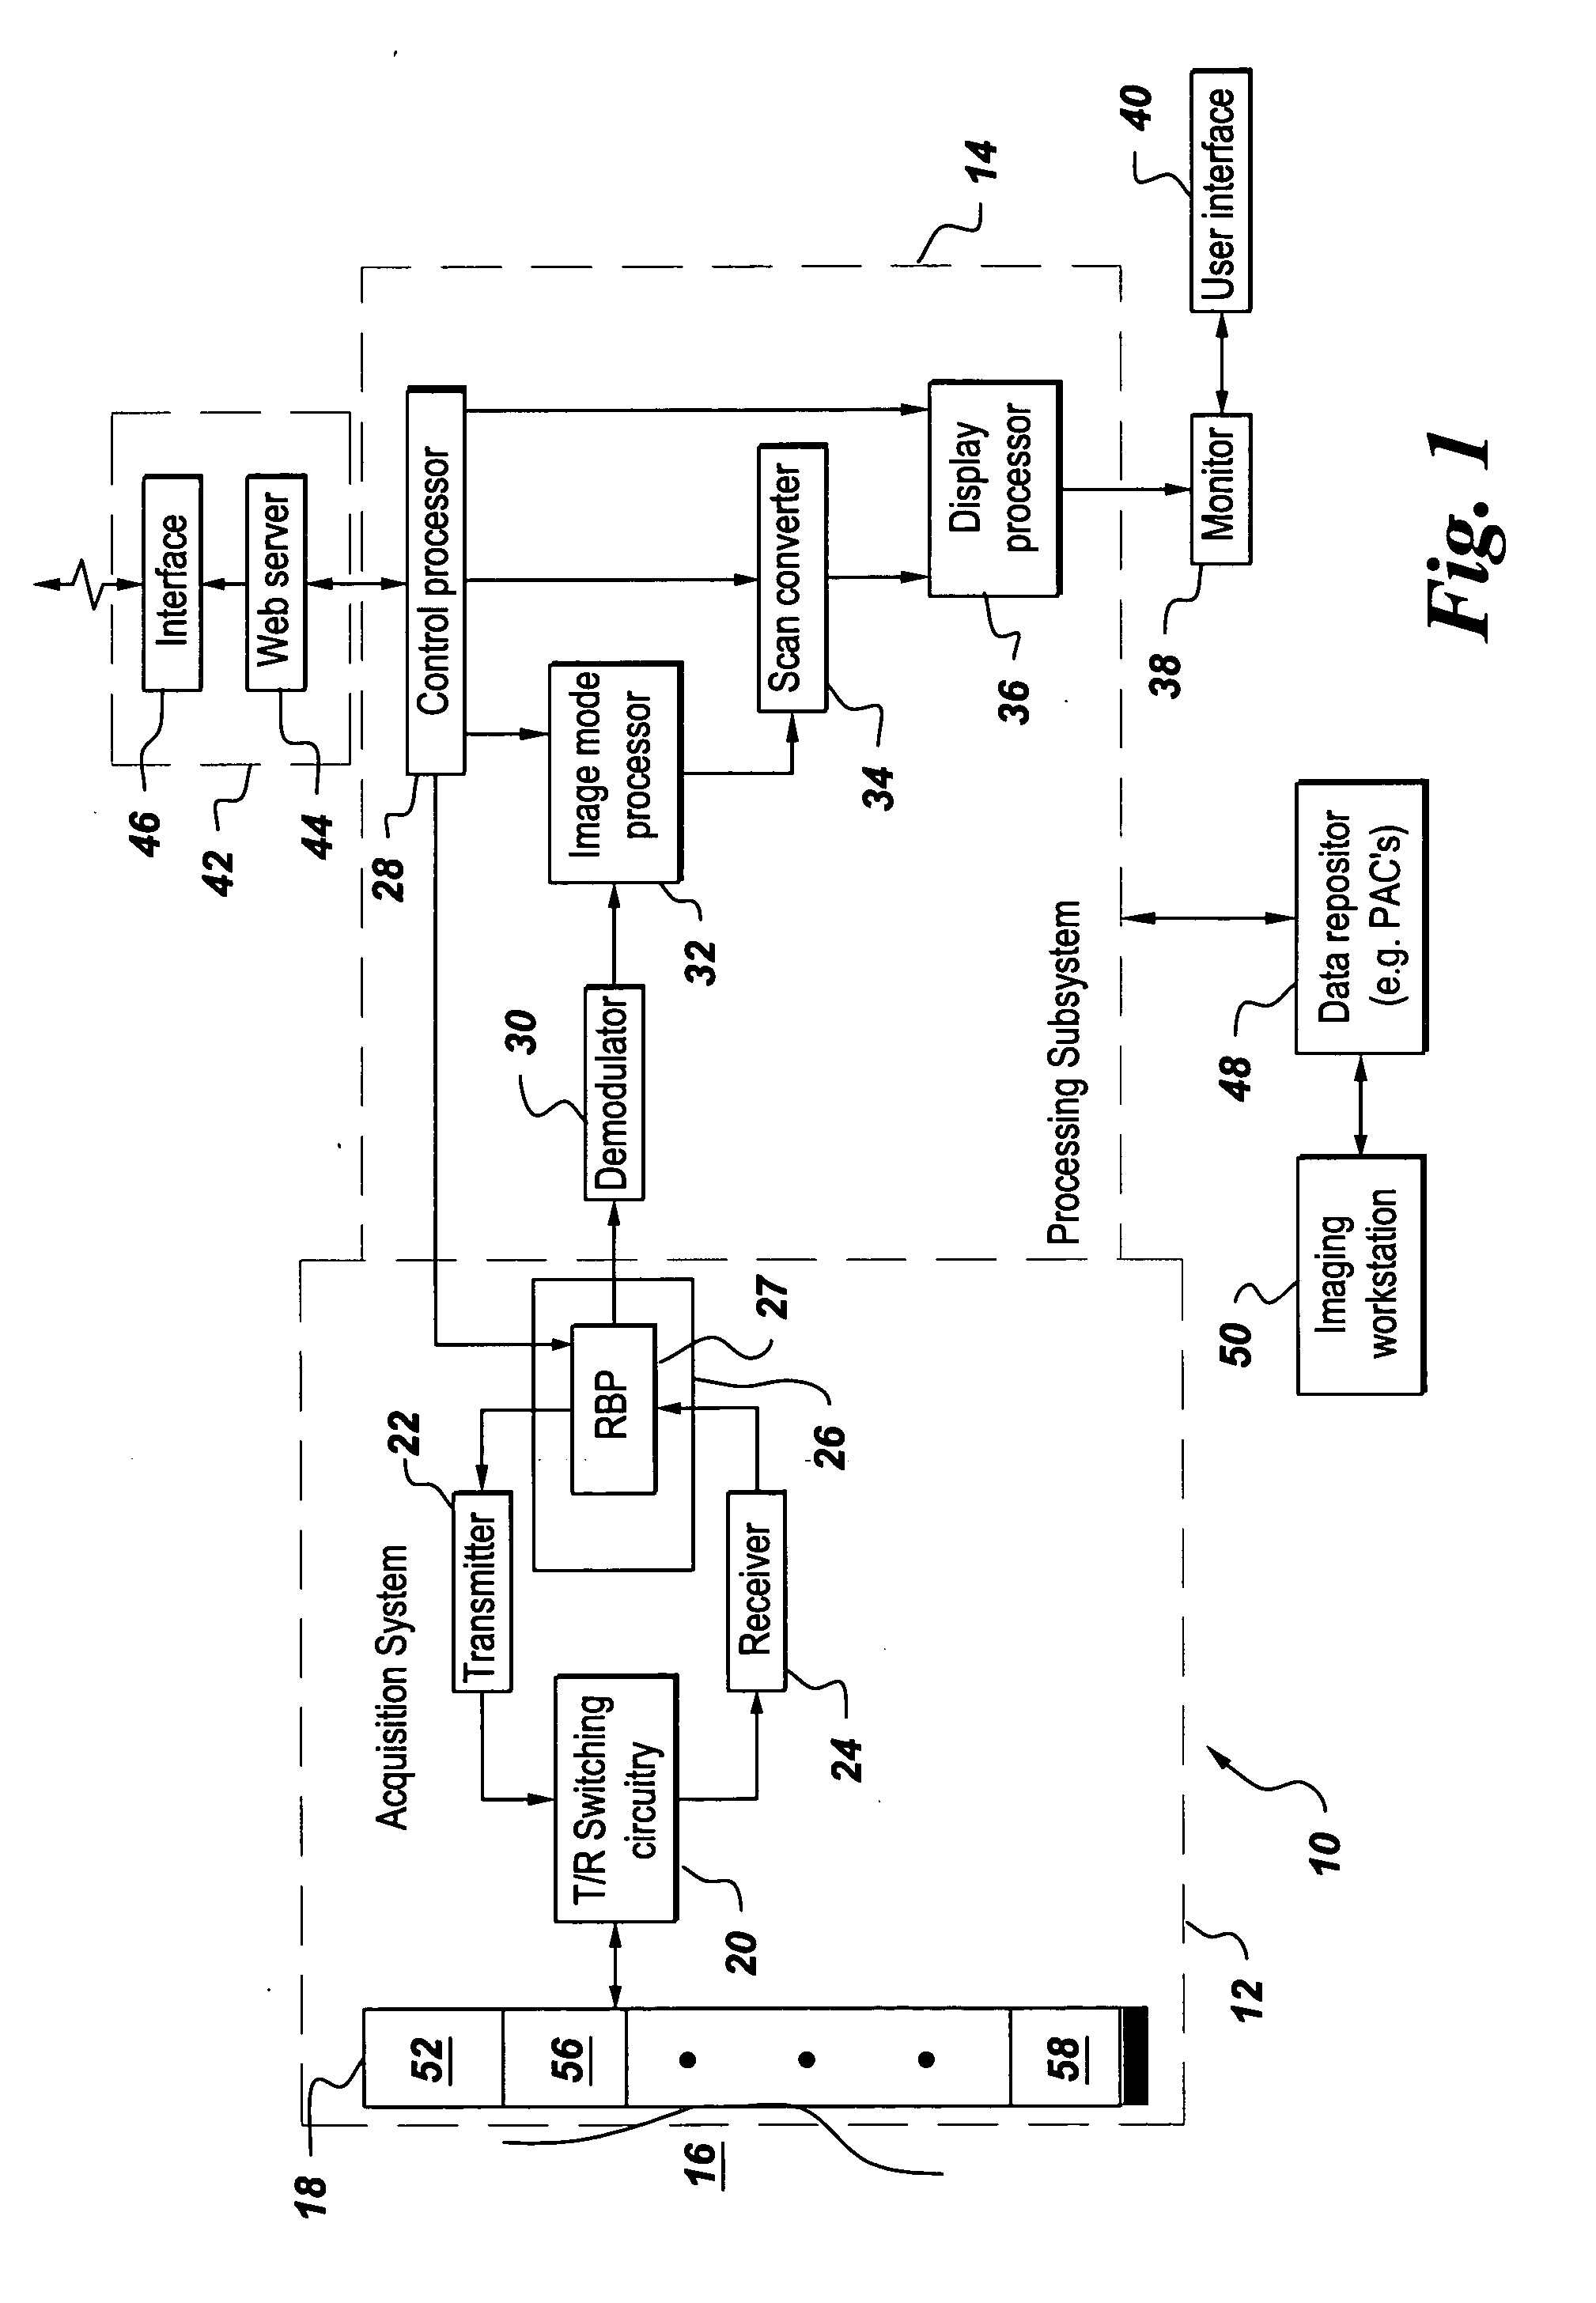 Time delay estimation method and system for use in ultrasound imaging